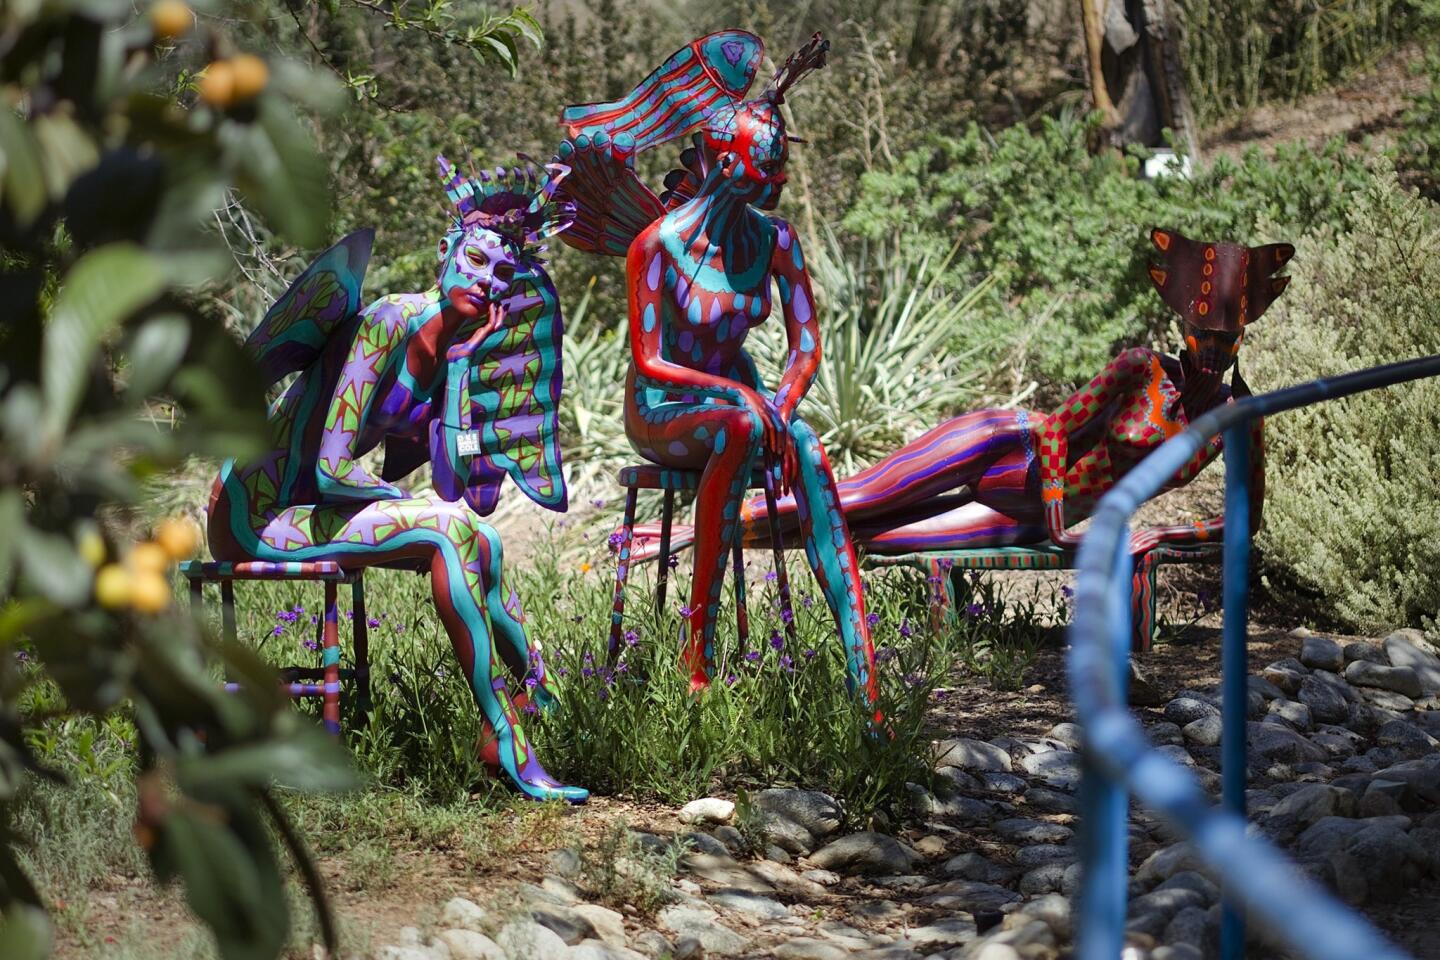 Fiberglass mannequins on stools by Dee Marcellus Cole during the Sculpture in the Garden by the Maloof Foundation for the Arts and Crafts in the large garden on the Maloof property in Alta Loma.